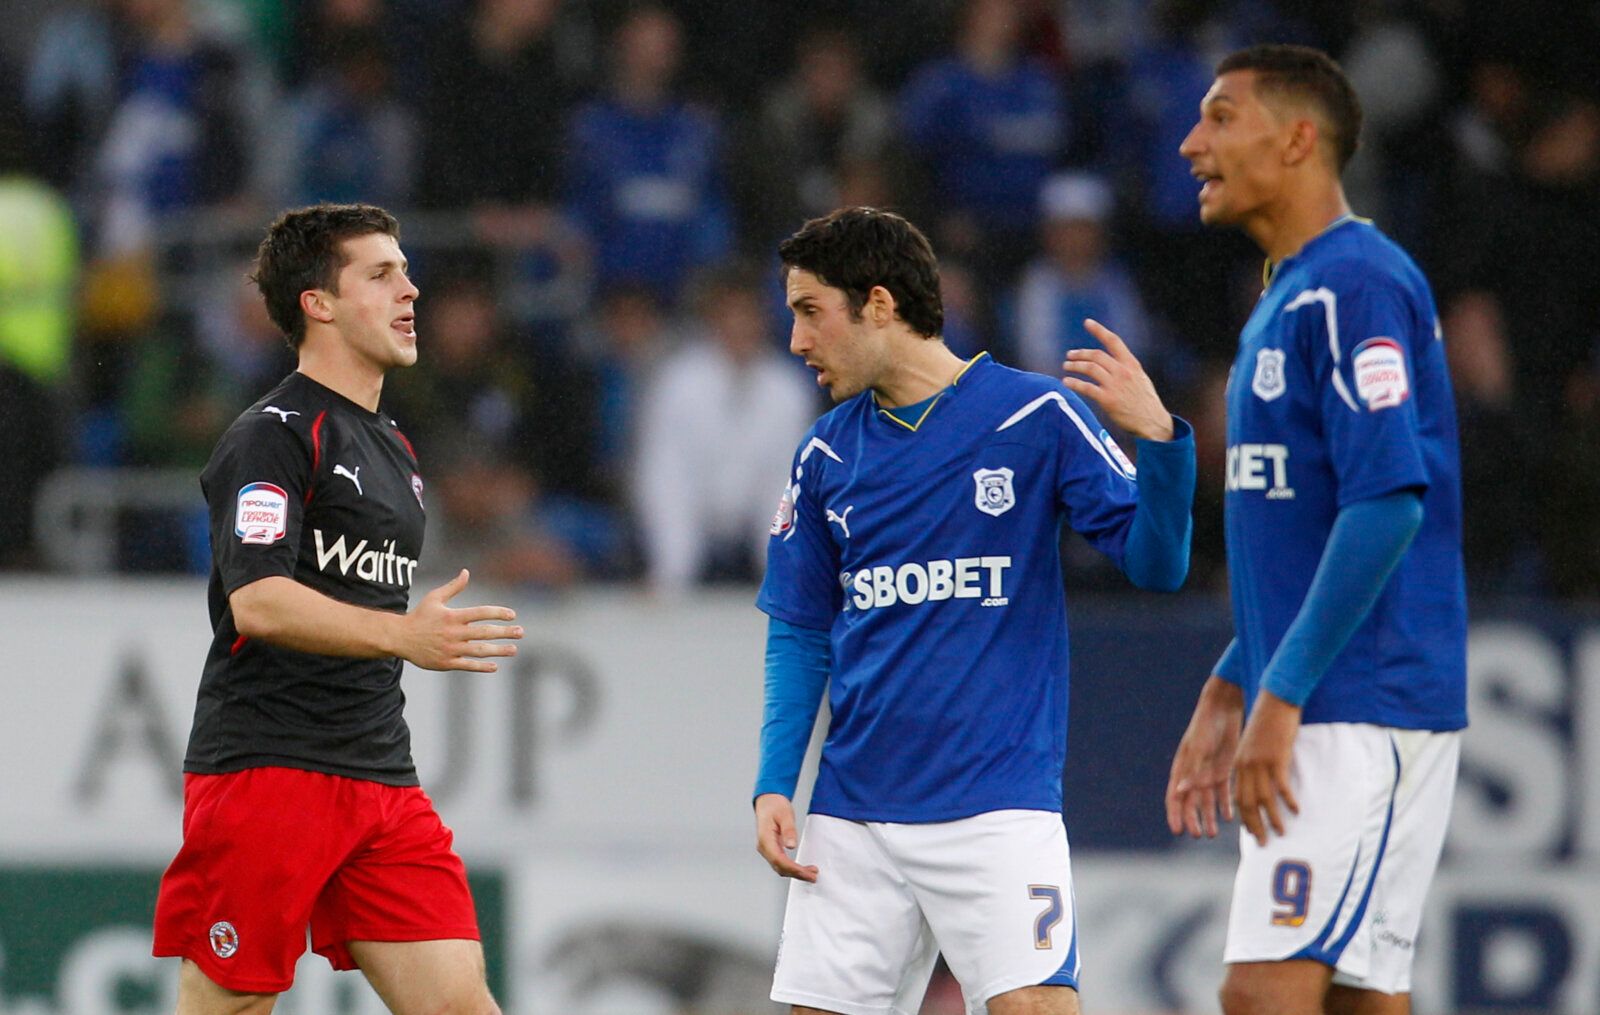 Football - Cardiff City v Reading - npower Football League Championship Play-Off Semi Final Second Leg - Cardiff City Stadium - 10/11 - 17/5/11 
Jay Bothroyd (R) and Peter Whittingham - Cardiff City with Shane Long - Reading 
Mandatory Credit: Action Images / John Sibley